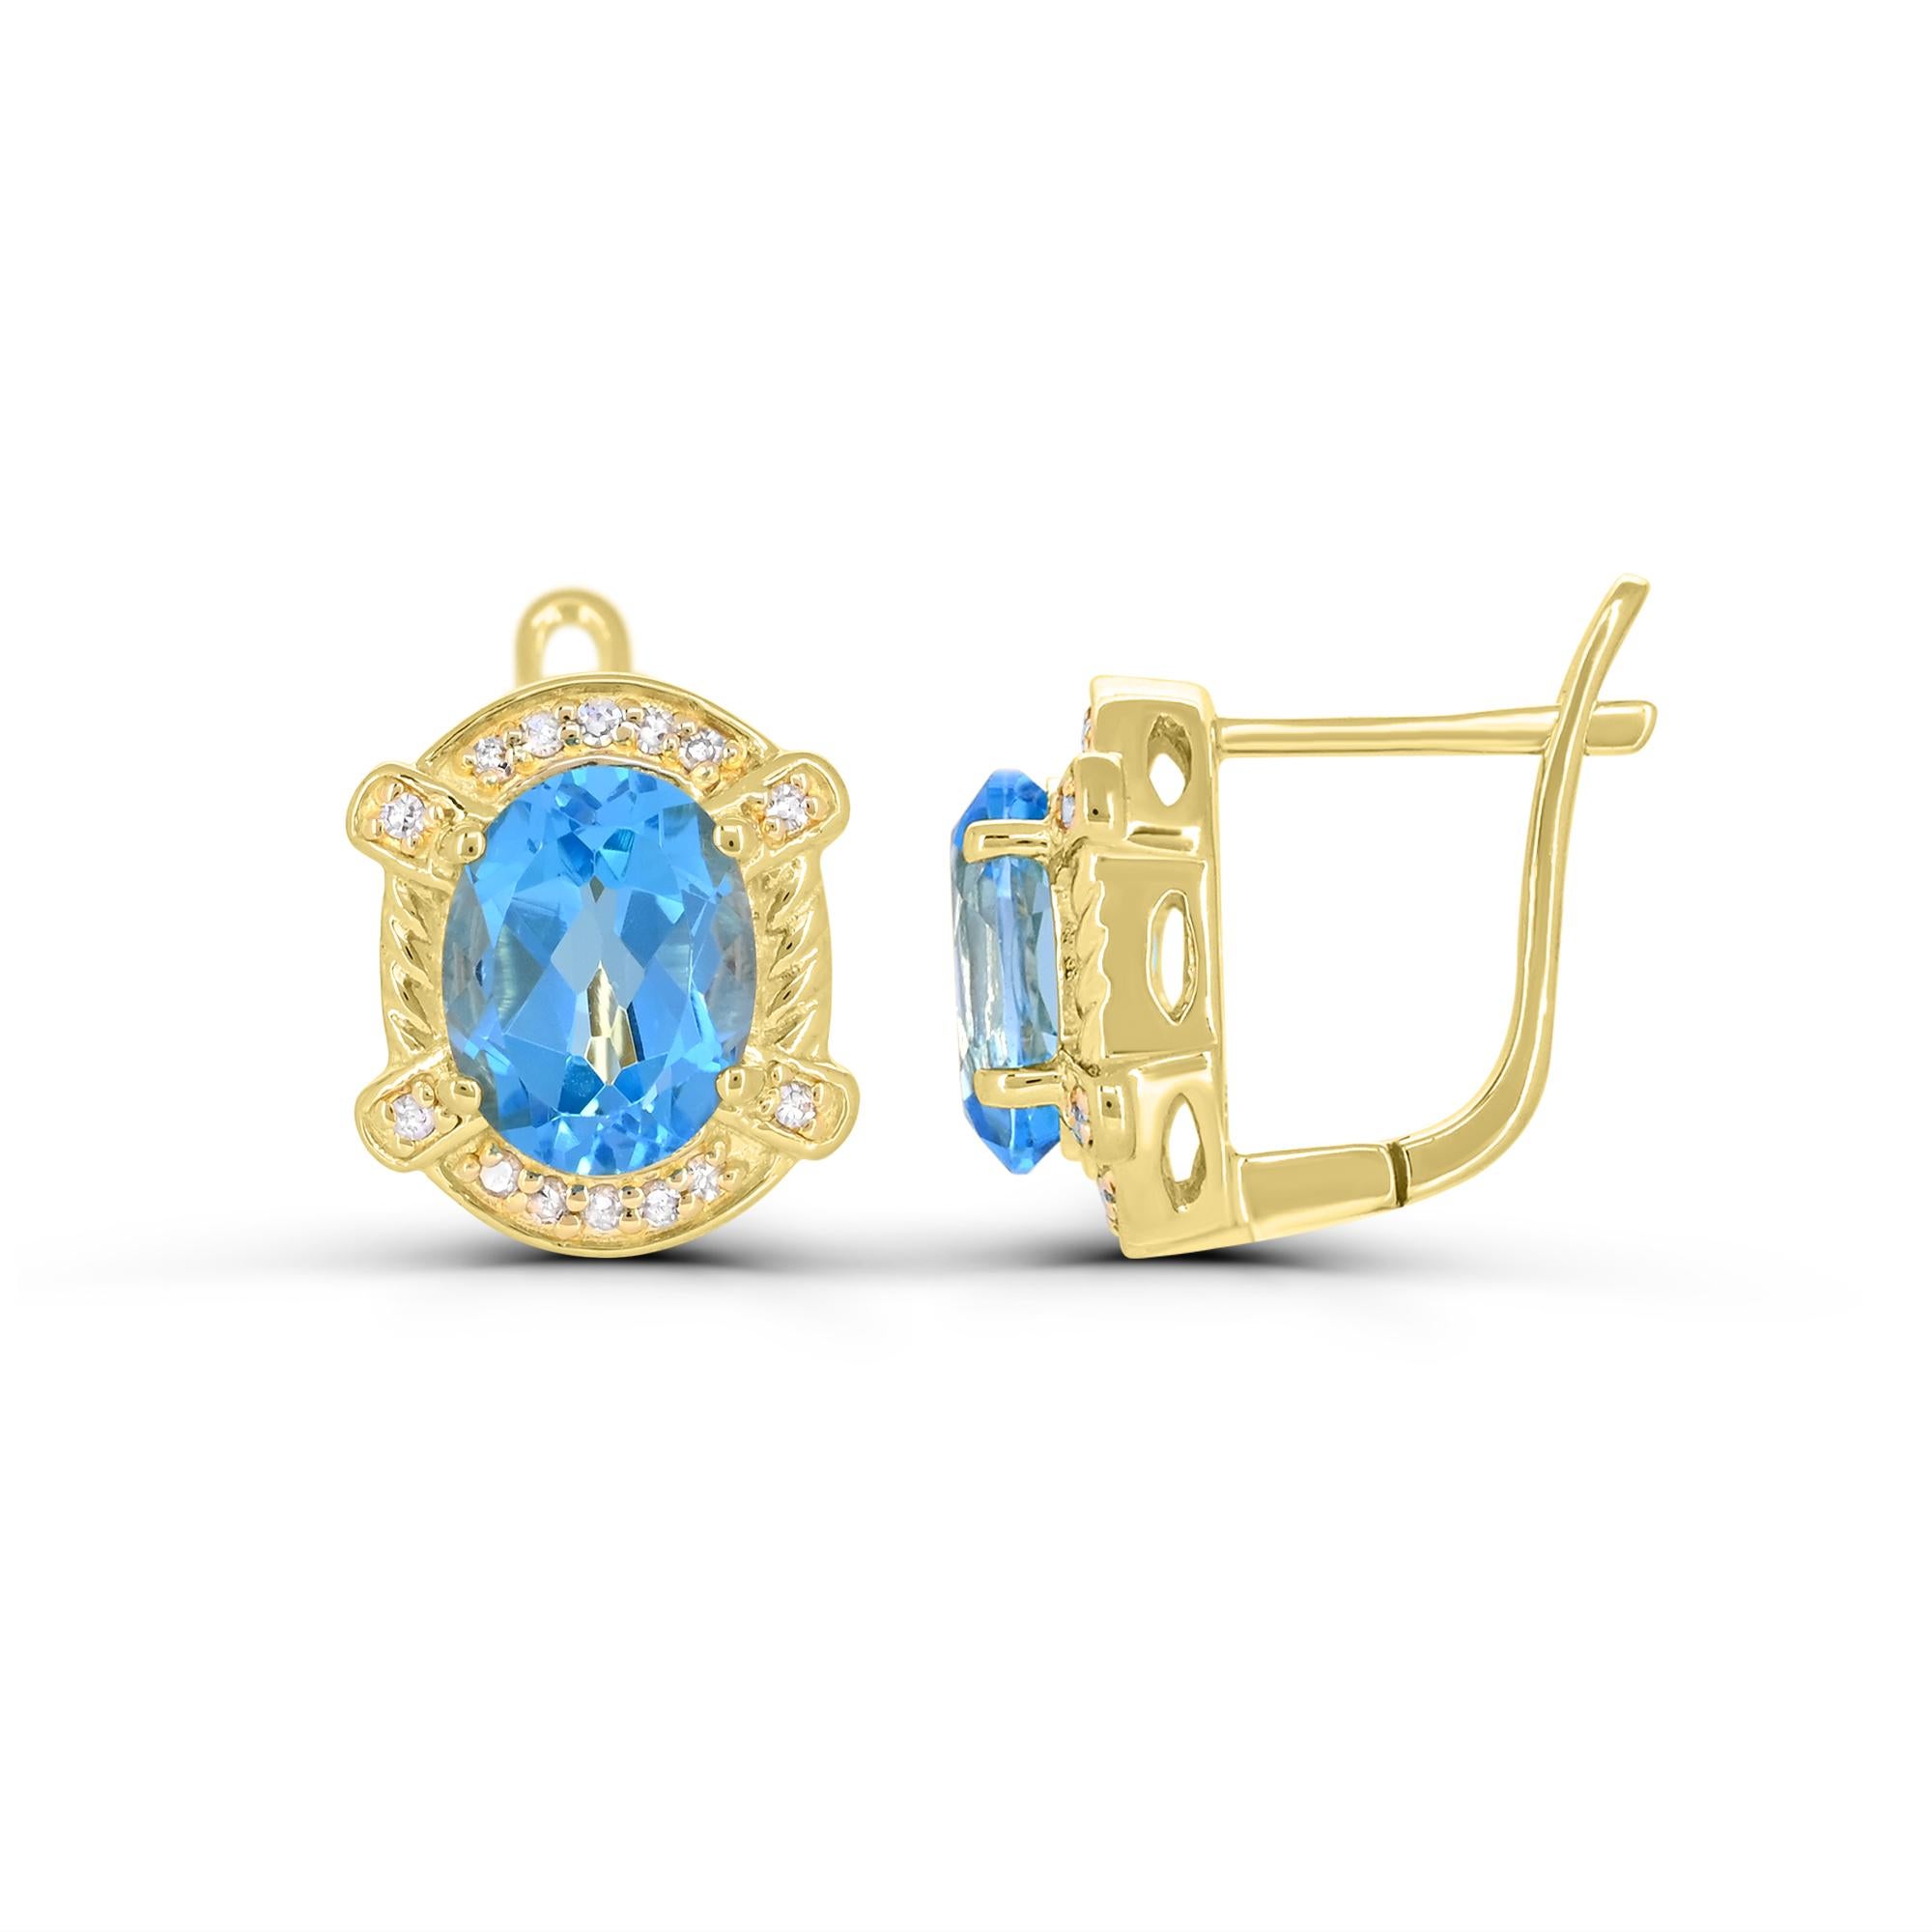 Indulge in the elegance of our Swiss Blue Topaz and White Diamond Earrings in 14K Gold Over Sterling Silver. Crafted with meticulous attention to detail, these earrings boast a stunning combination of Swiss blue topaz and sparkling white diamonds.